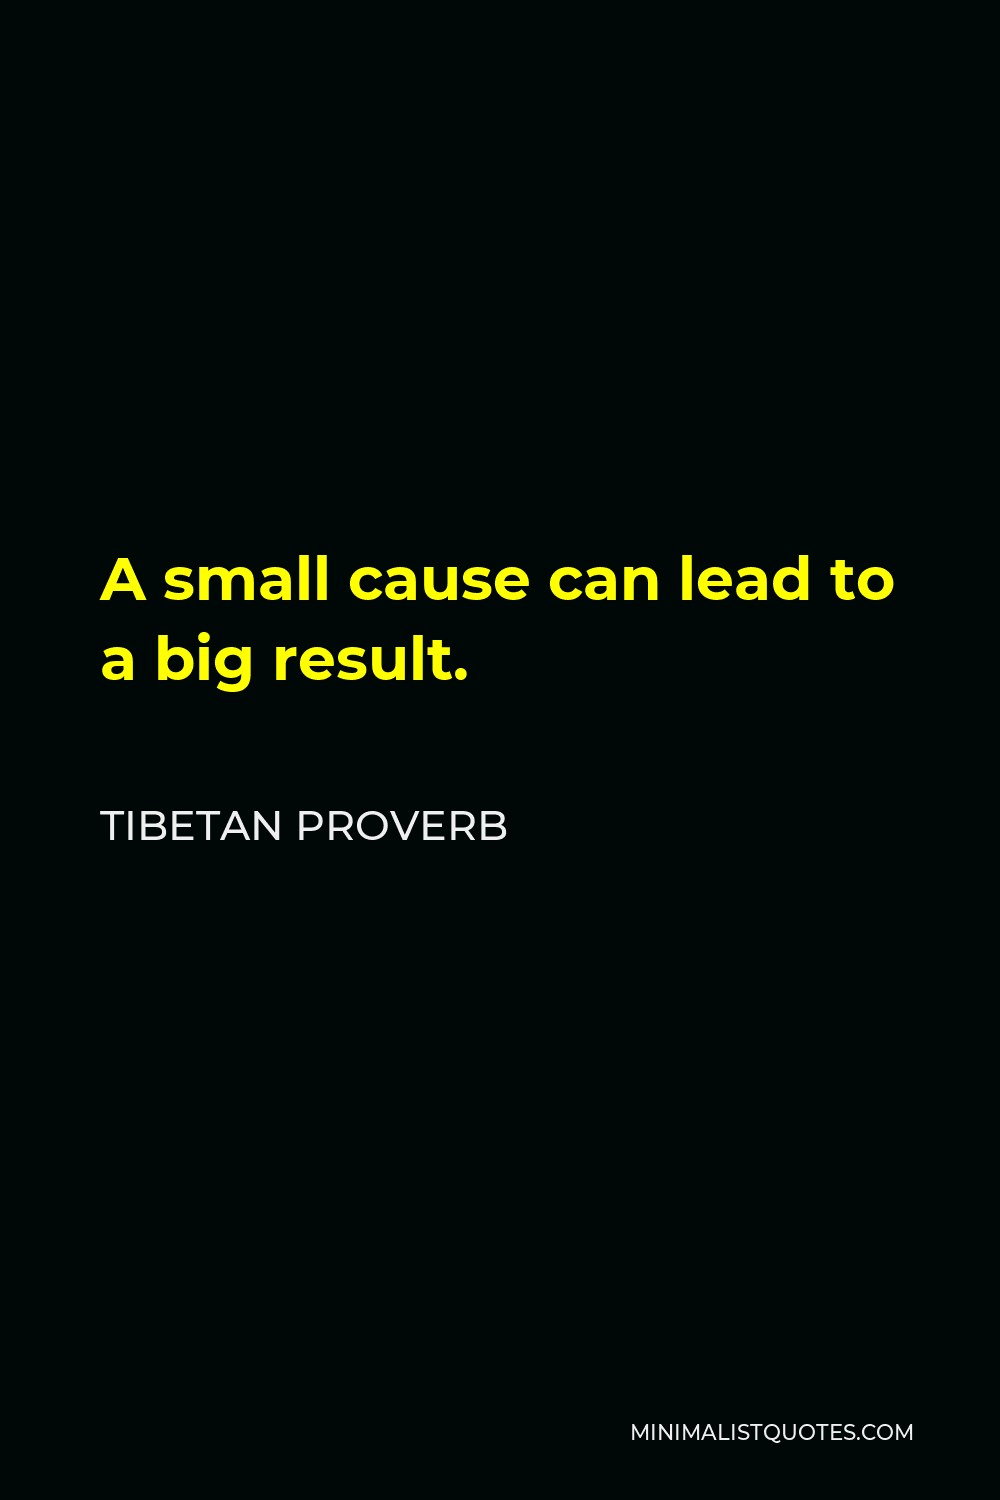 Tibetan Proverb Quote - A small cause can lead to a big result.